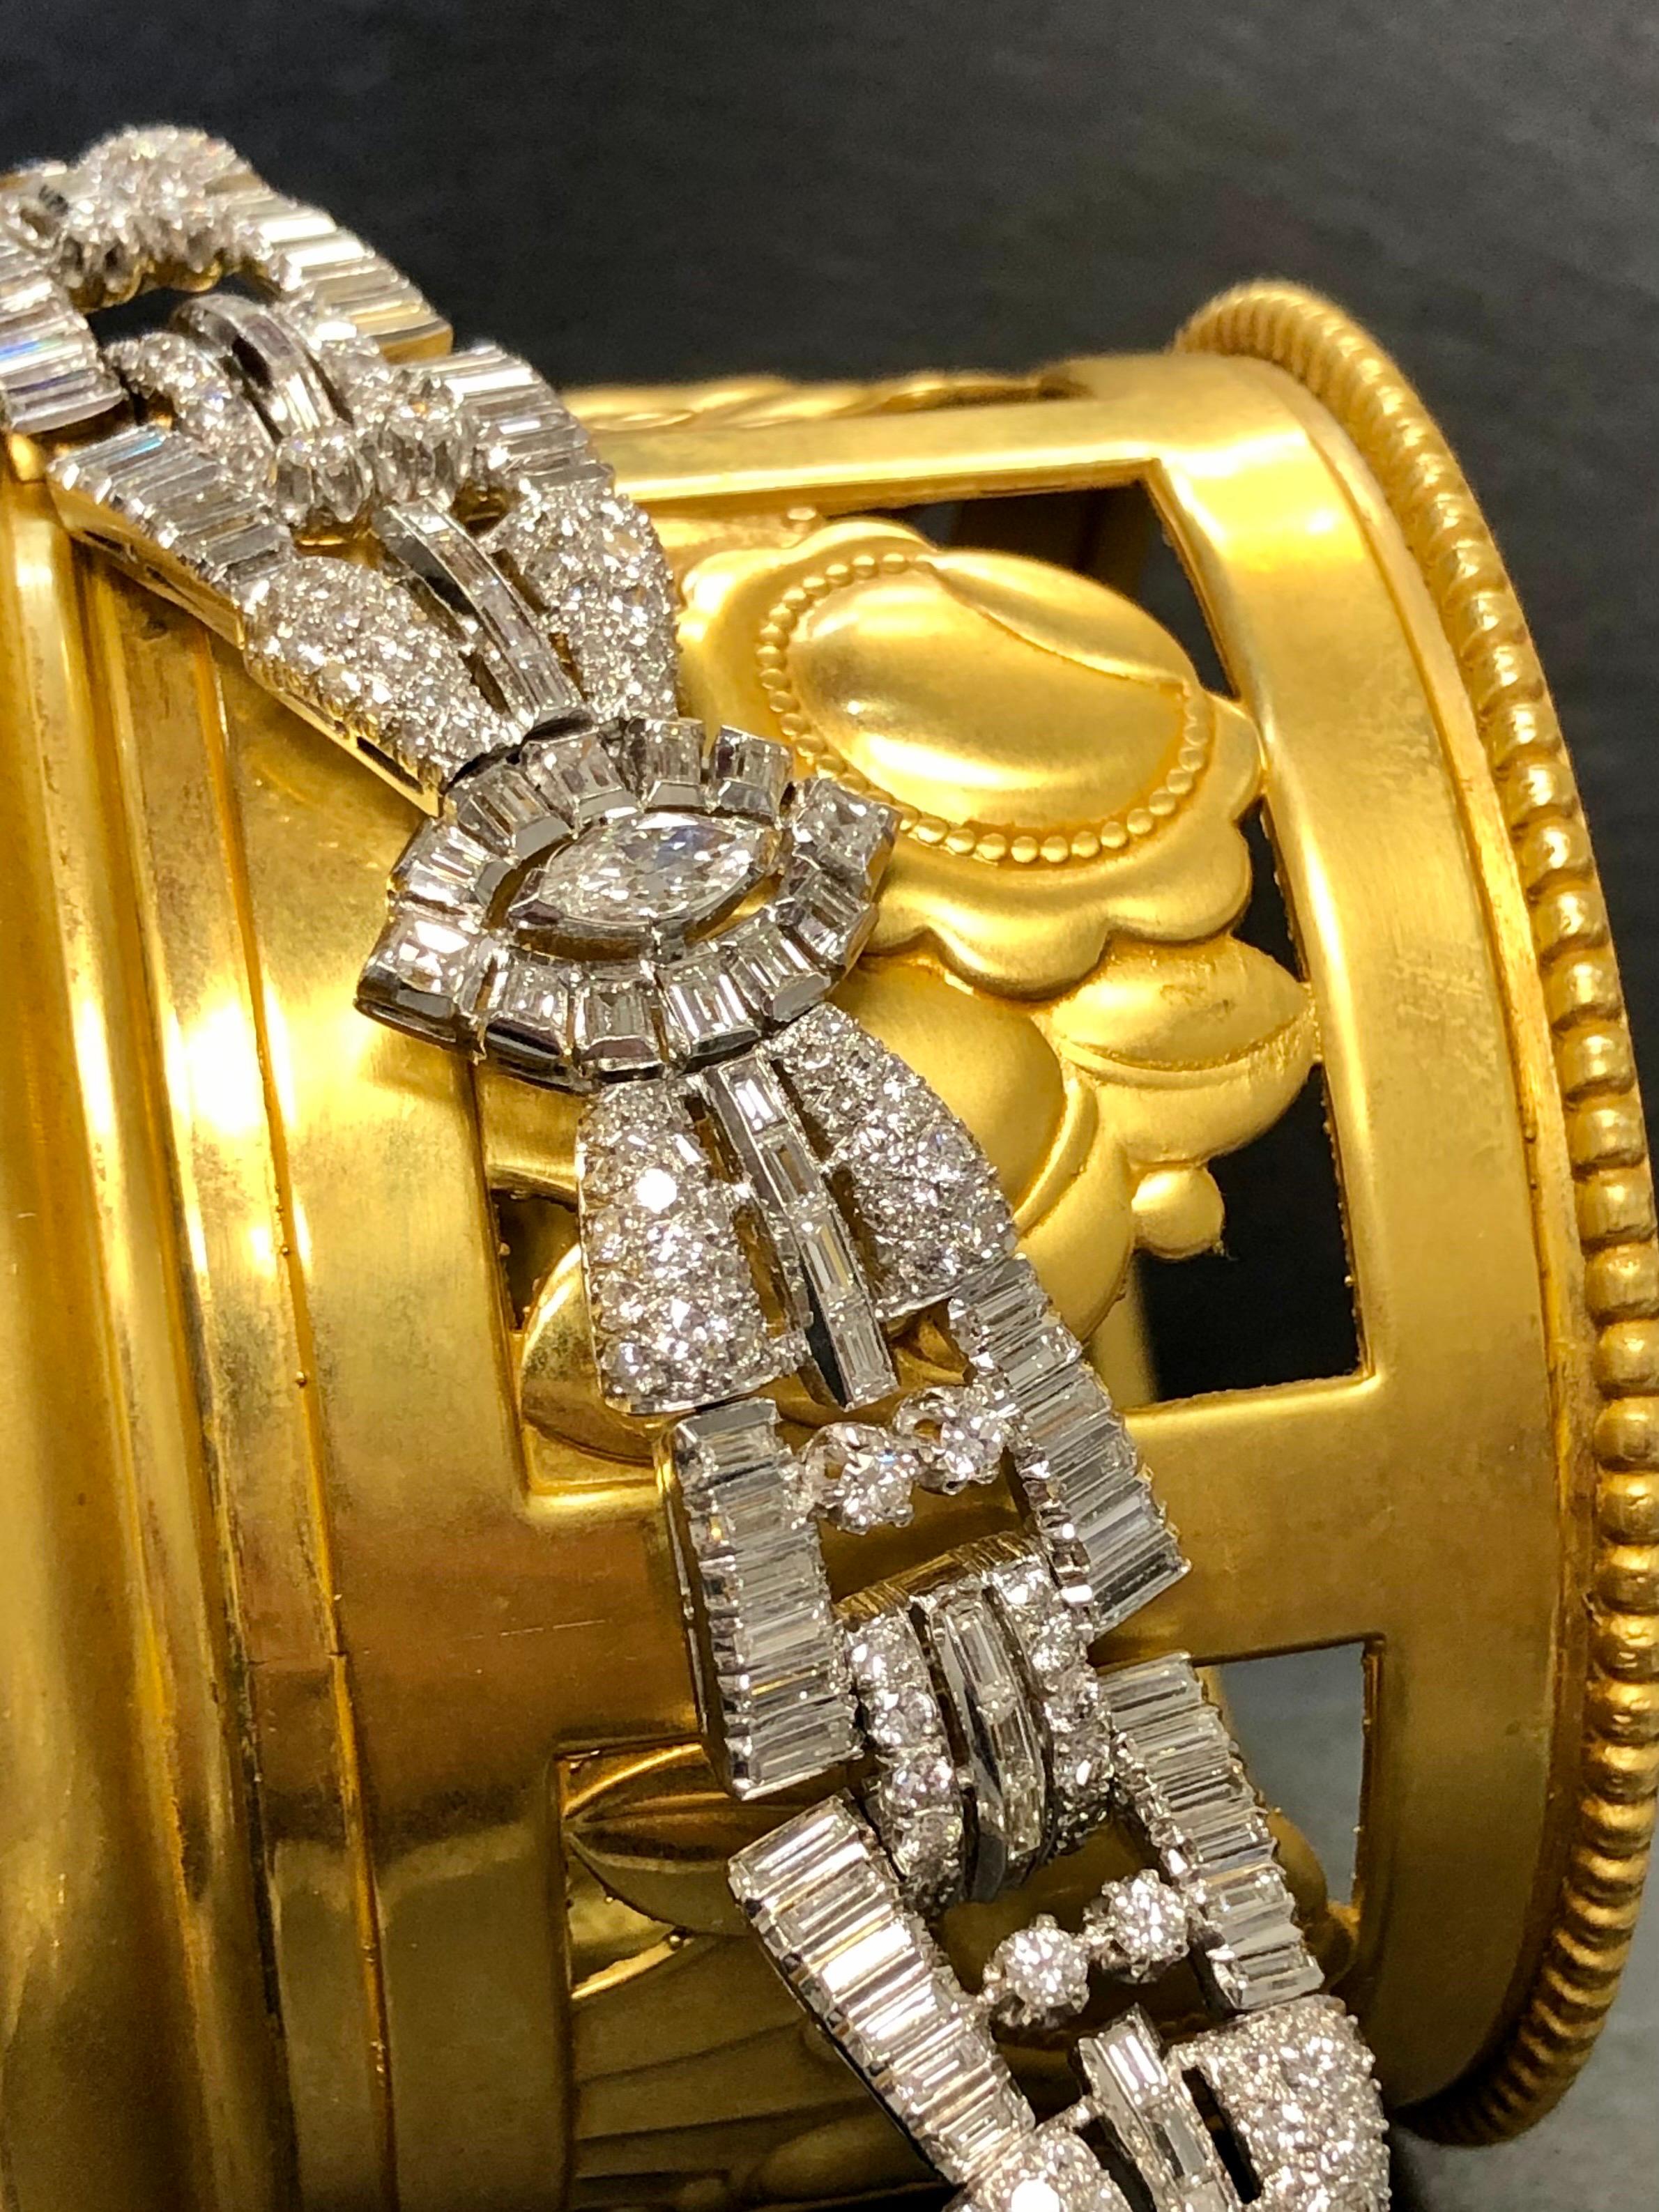 A stunning 1950’s bracelet done in platinum set with approximately 15.60cttw in larger Marquise diamonds as well as numerous baguette and round diamonds all being G-H color and Vs1-2 clarity.

Dimensions/Weight
Measures 7” long by .75” wide. Weight